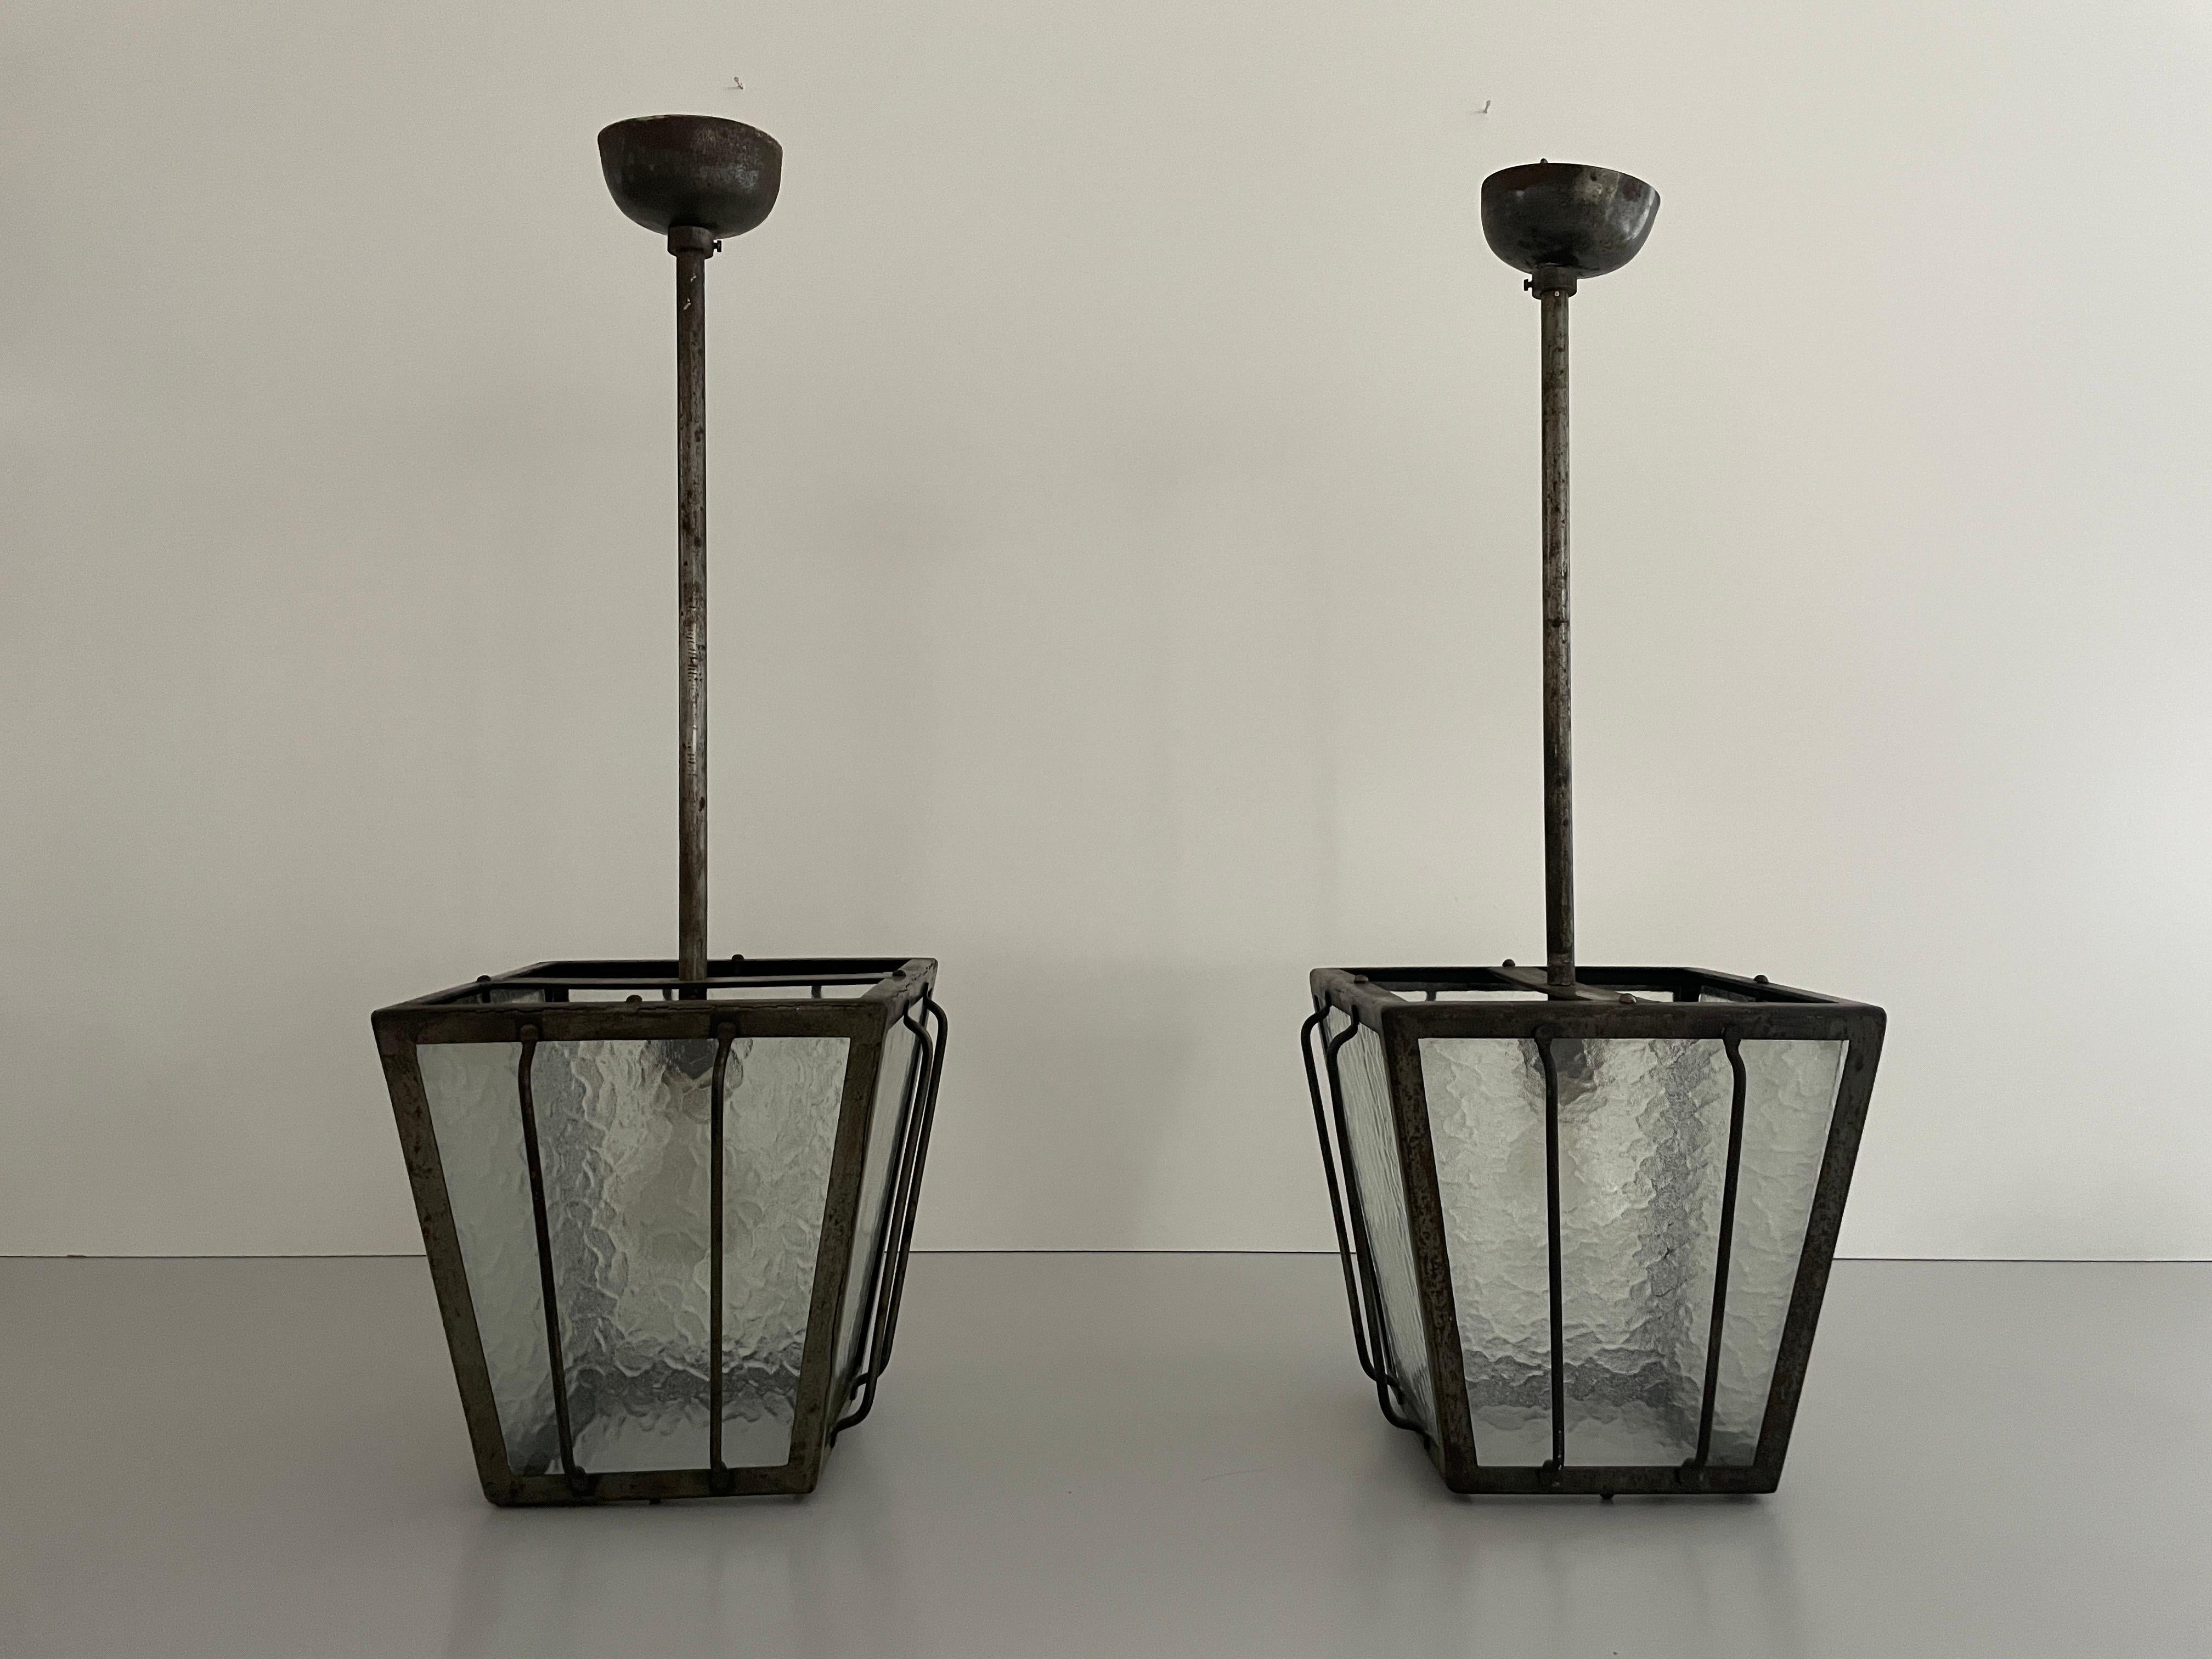 Frosted Glass Milano Apartment Pair of Ceiling Lamps, 1950s, Italy For Sale 12